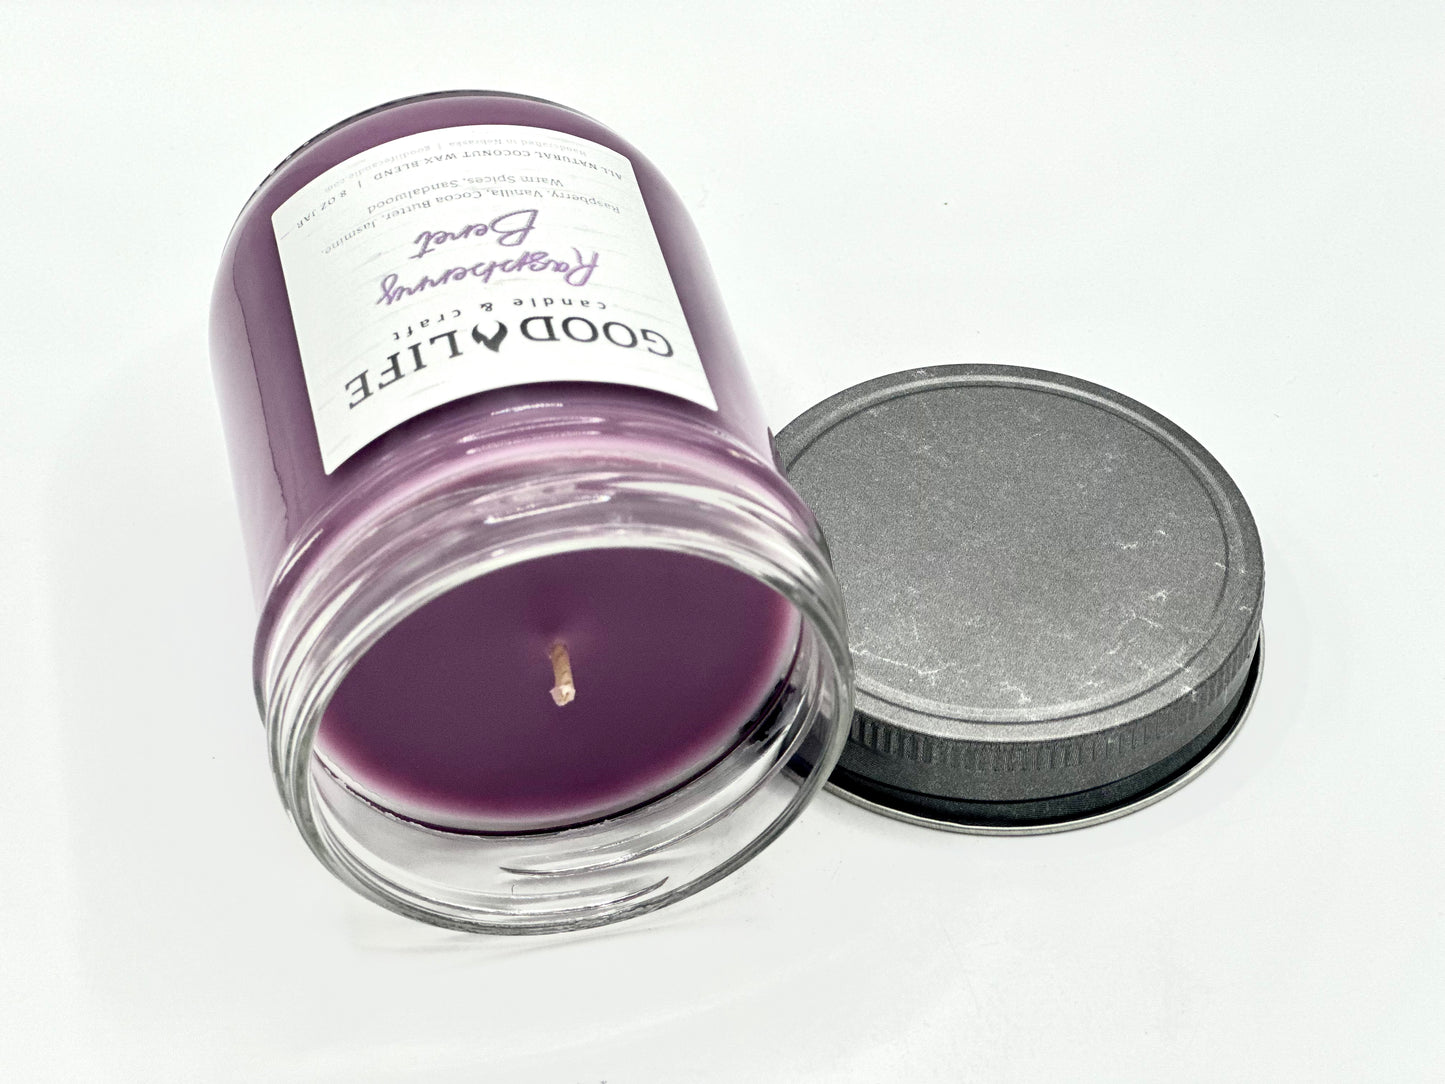 Raspberry Beret Scented Candle